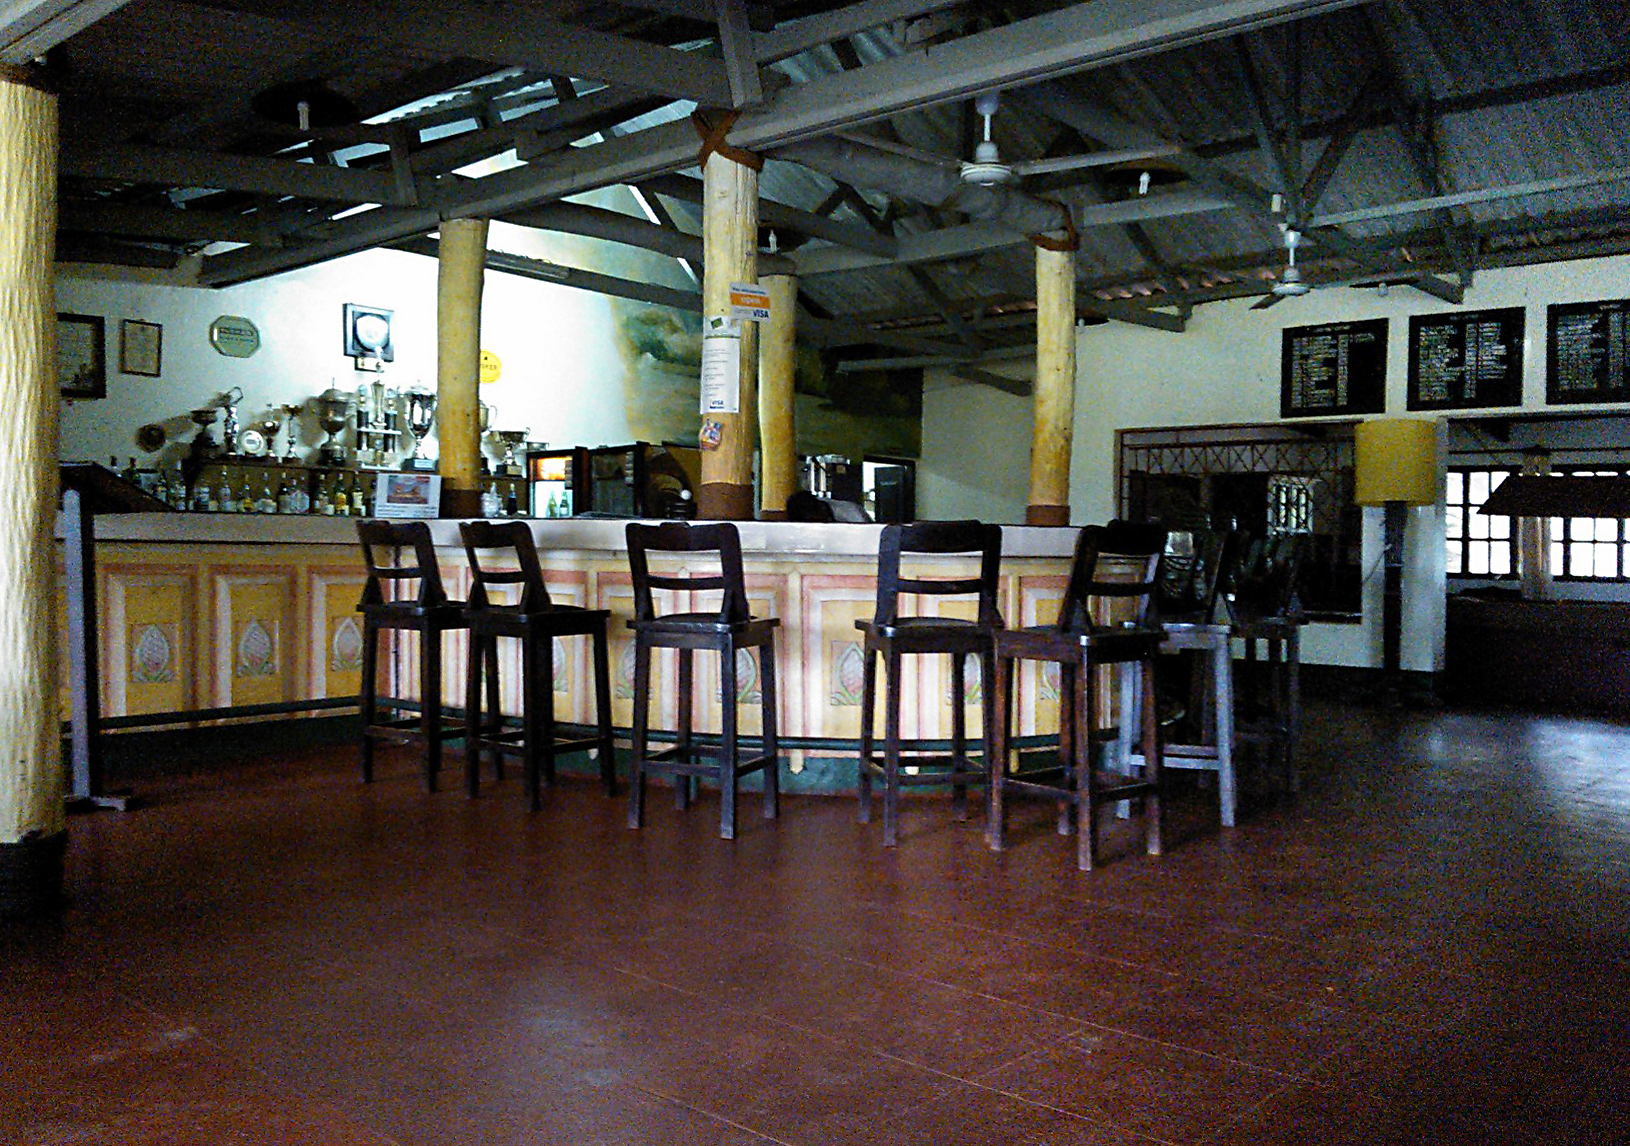 Clubhouse bar